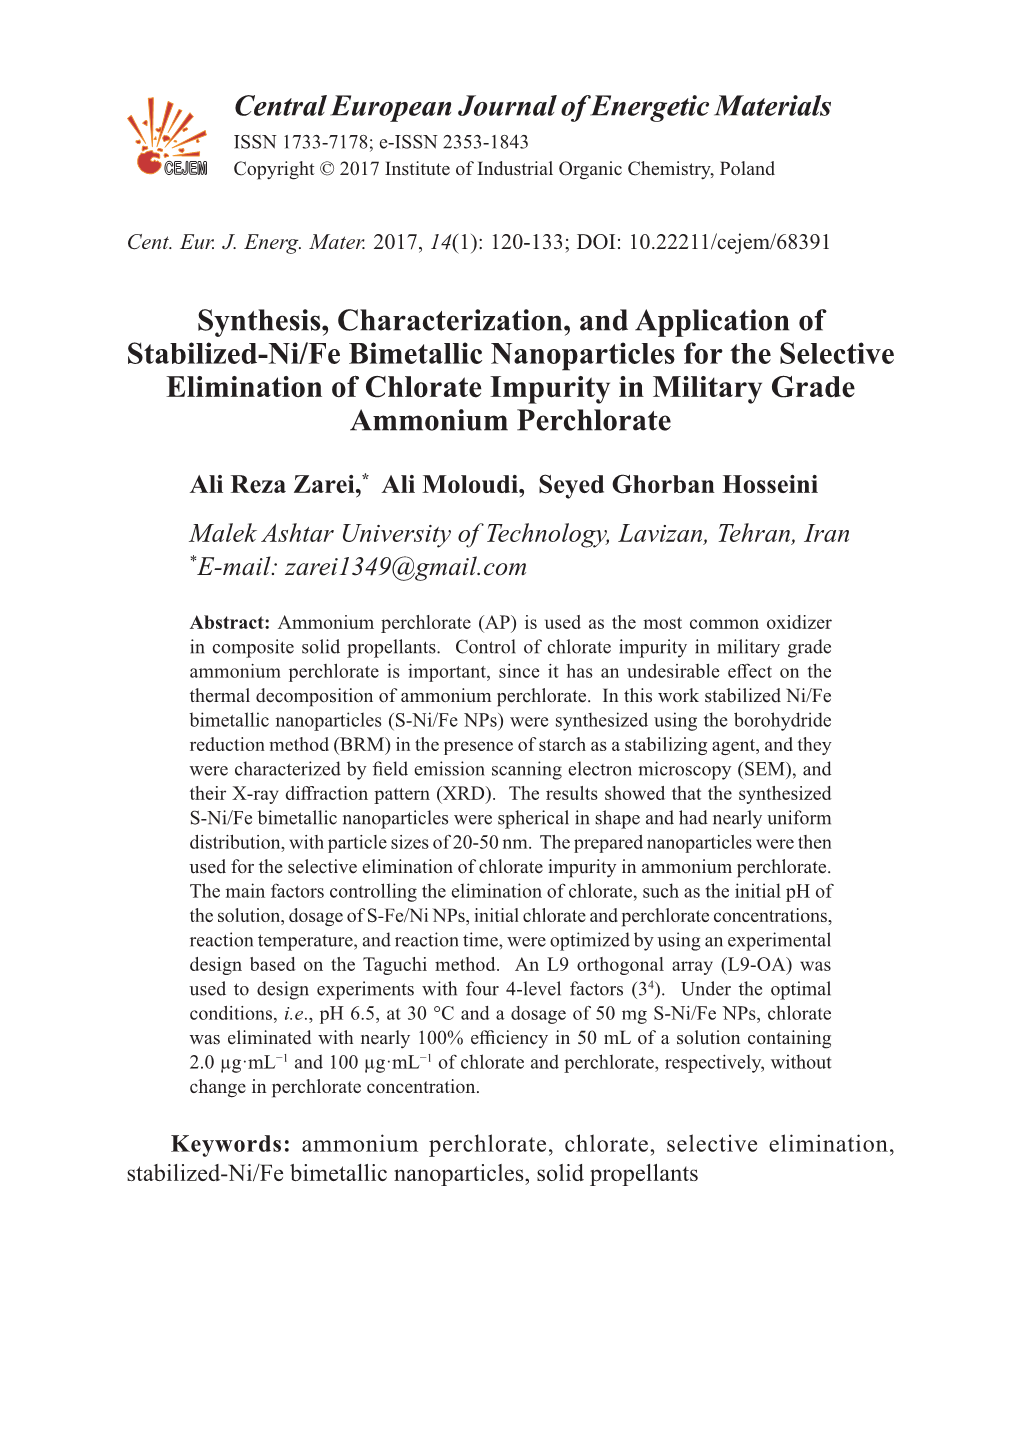 Synthesis, Characterization, and Application of Stabilized-Ni/Fe